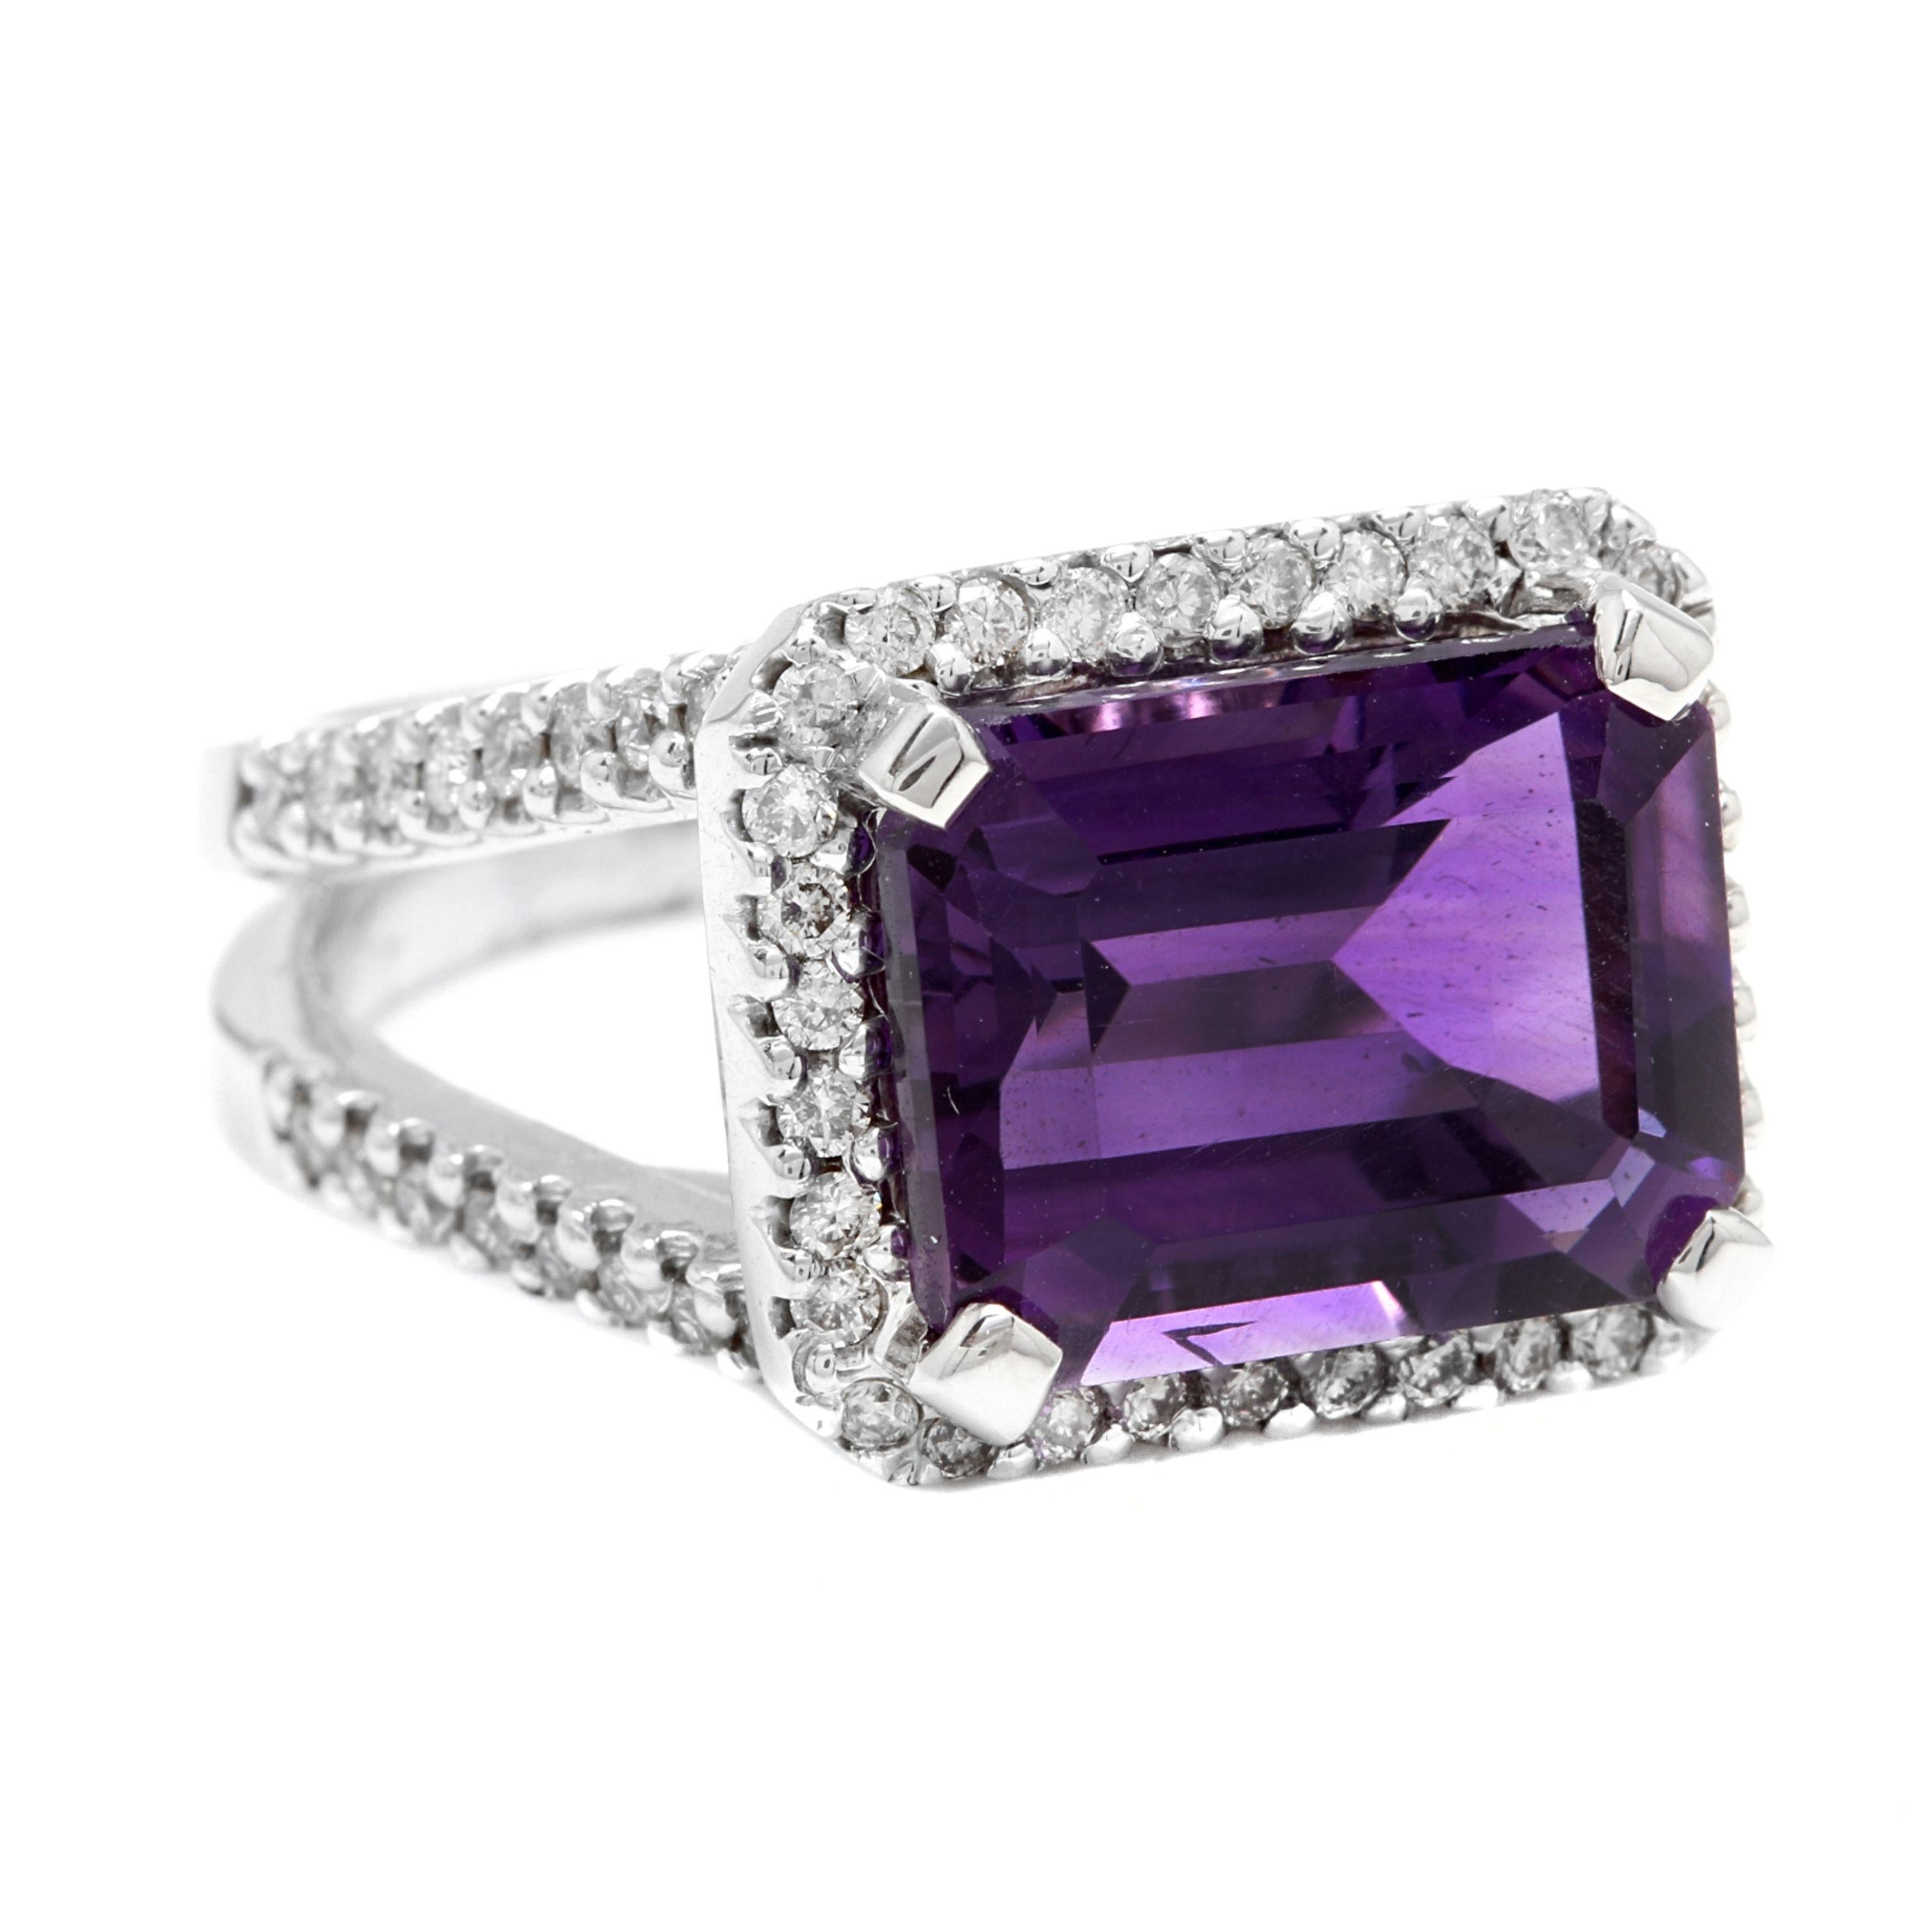 7.85 Carats Natural Amethyst and Diamond 14K Solid White Gold Ring

Total Natural Emerald Cut Amethyst Weights: Approx. 7.00 Carats

Amethyst Measures: Approx. 13.00 x 10.00mm

Natural Round Diamonds Weight: Approx. 0.85 Carats (color G-H /Clarity